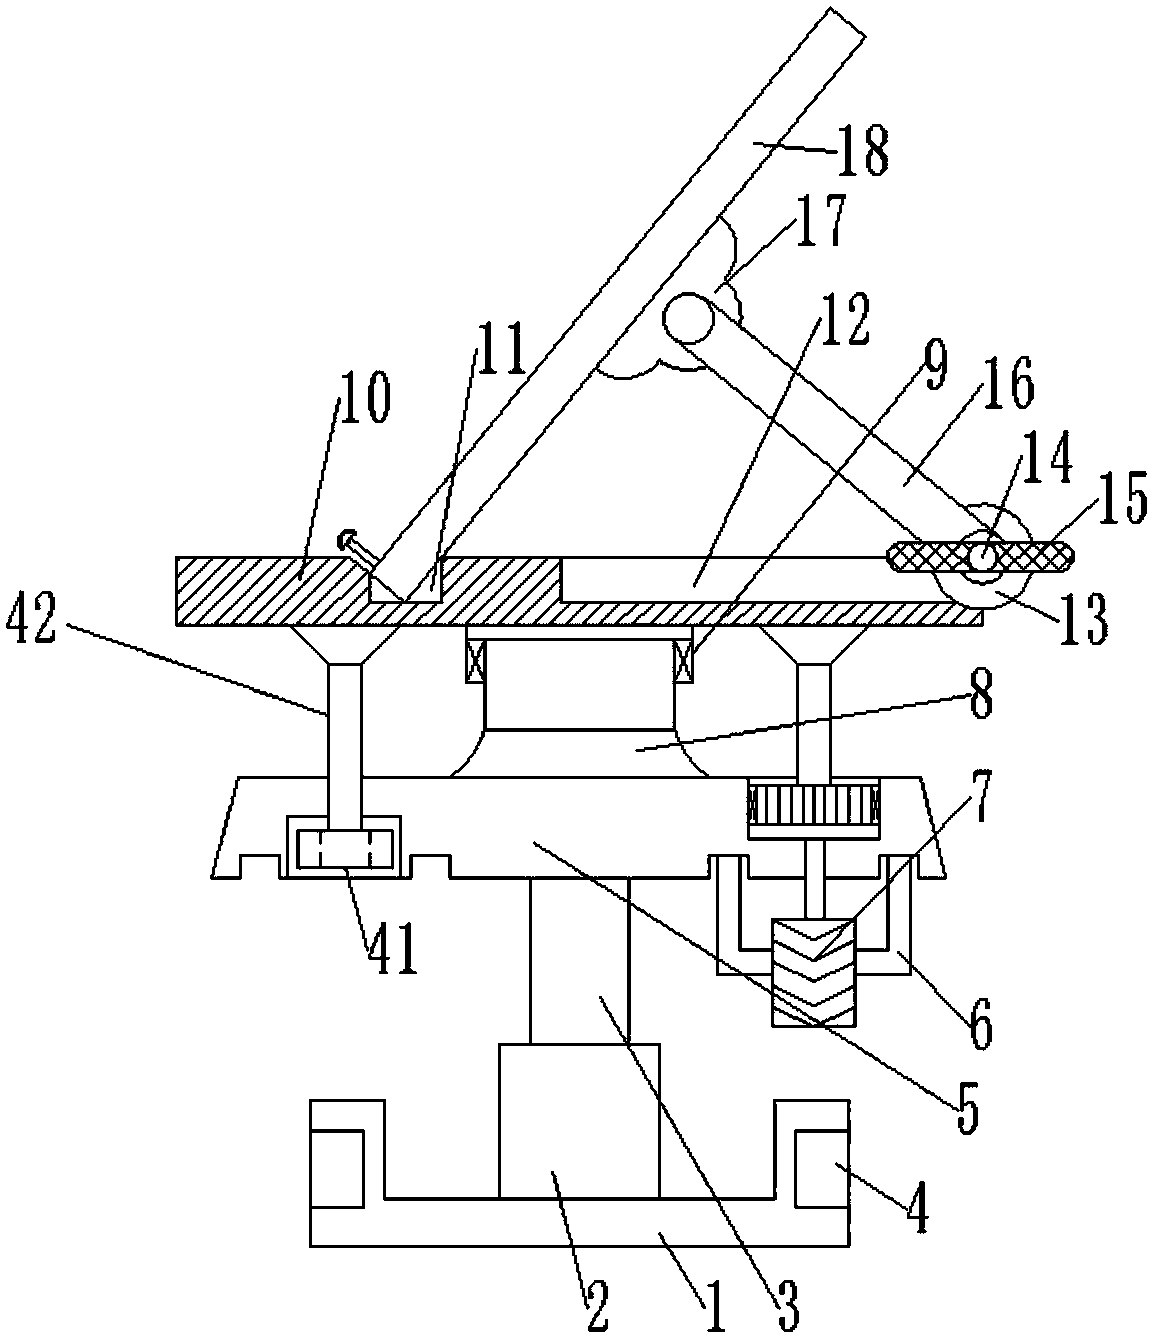 Clamping-fixing device used for electronic product maintenance and convenient to adjust